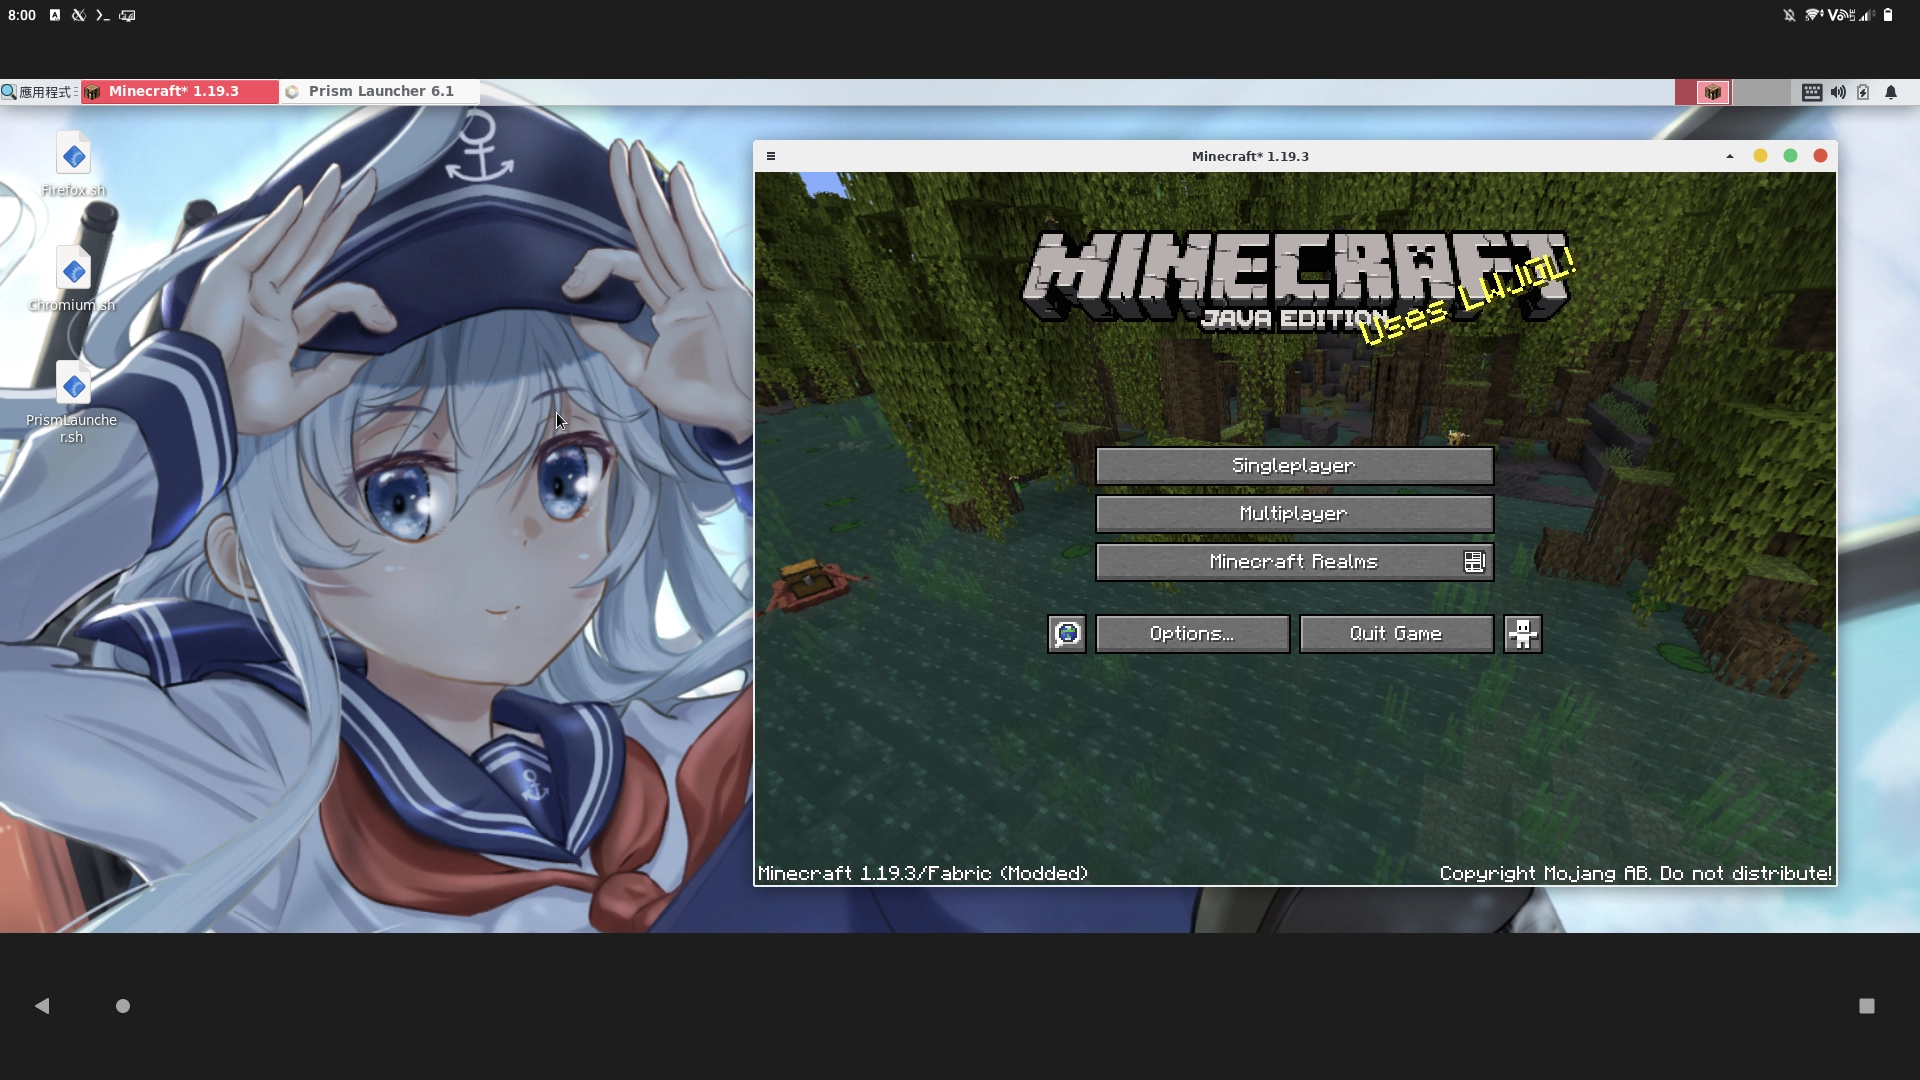 Minecraft's new launcher is now available on Linux